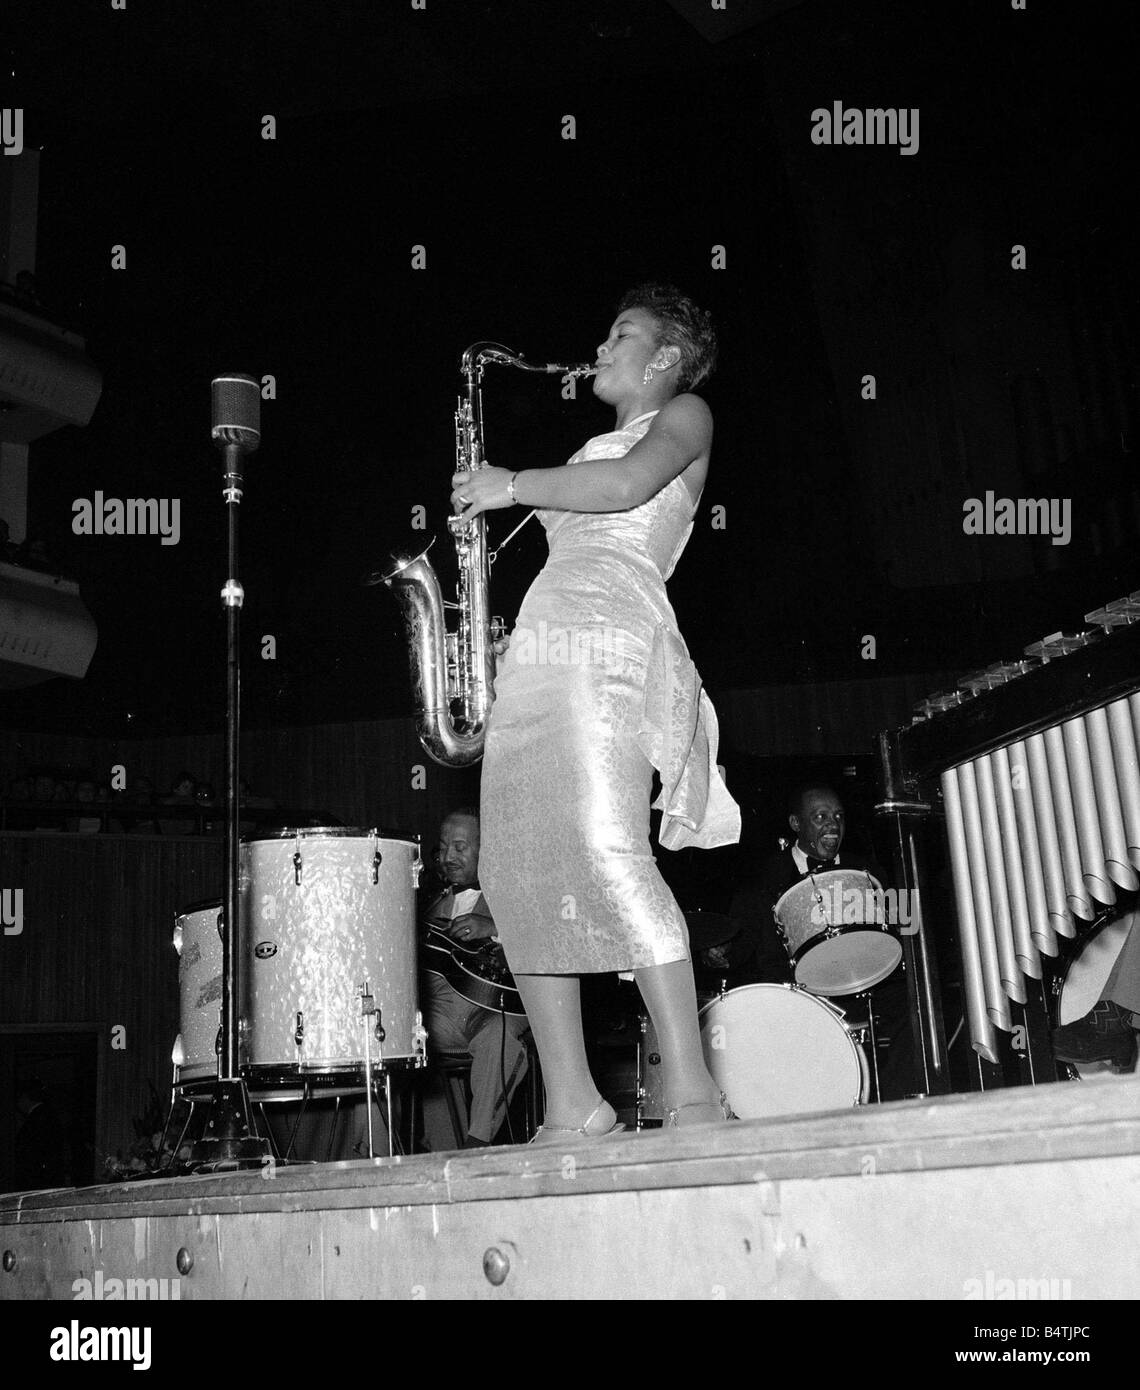 1950s Jazz performers Lionel Hampton band leader at the Royal Festival hall in London Band member plays saxophone Mirrorpix Stock Photo